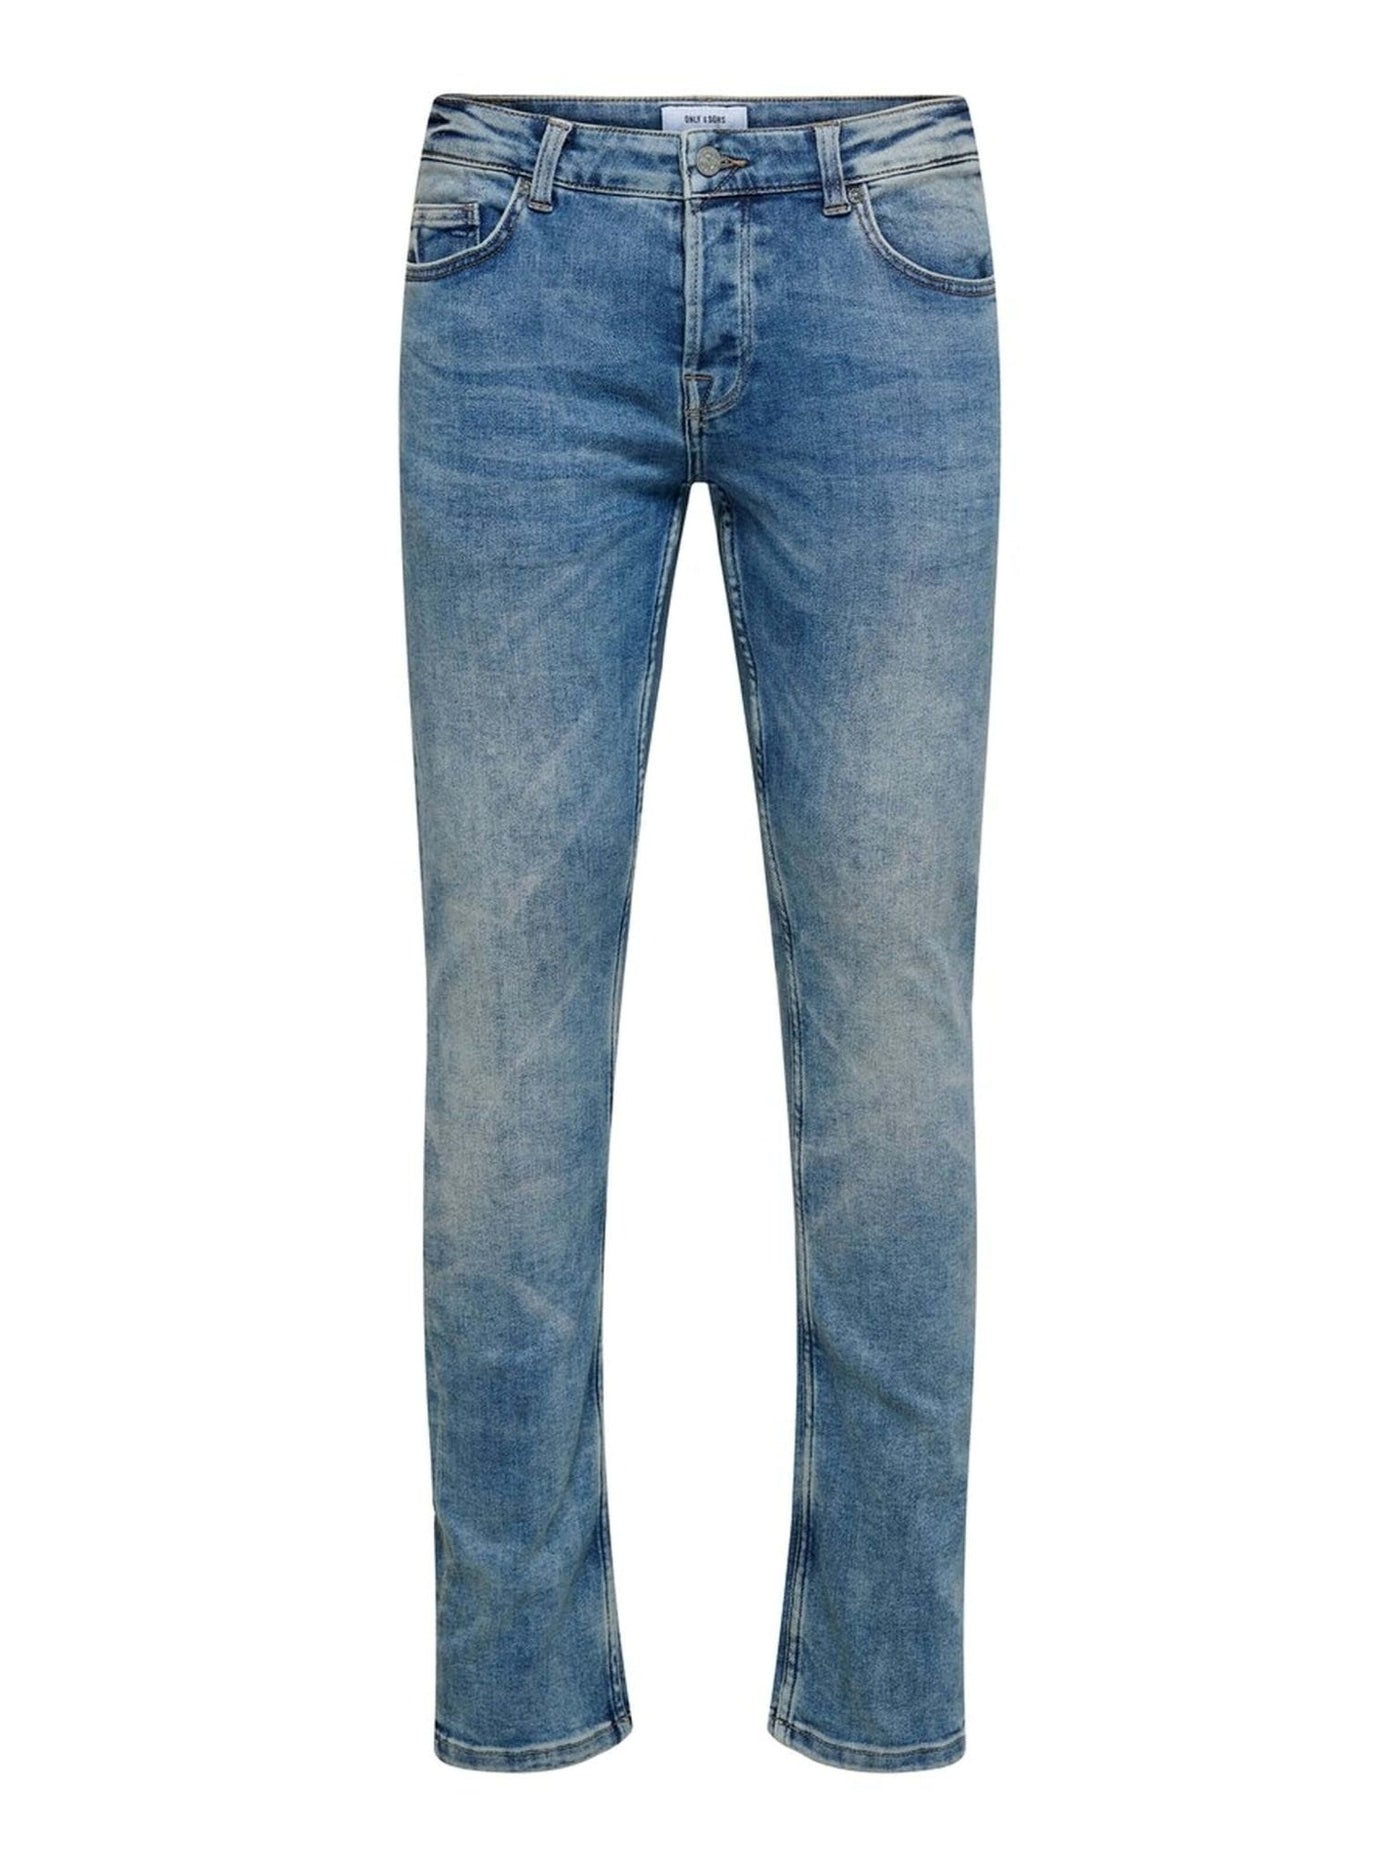 Loom Stretch Jeans - Denim Blue - Only & Sons 6